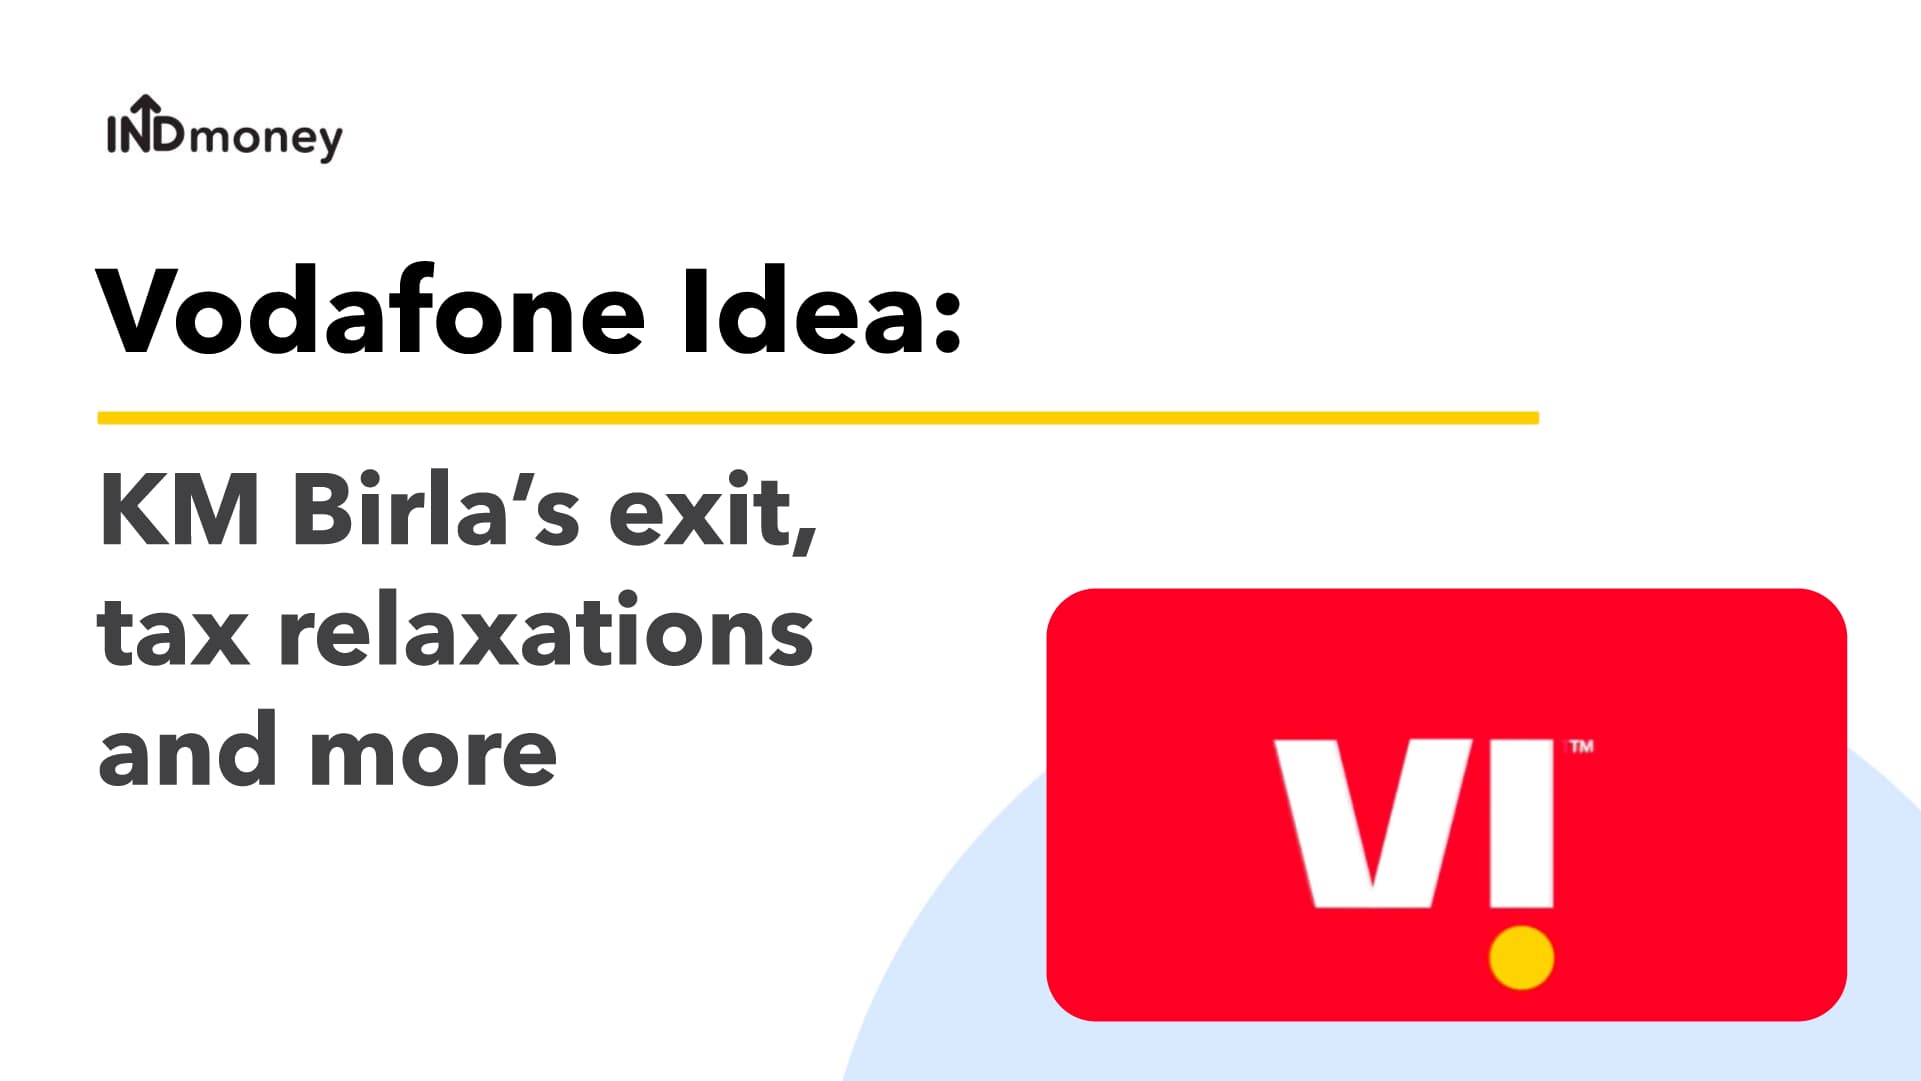 Vodafone Idea: KM Birla’s exit, tax relaxations and the road ahead